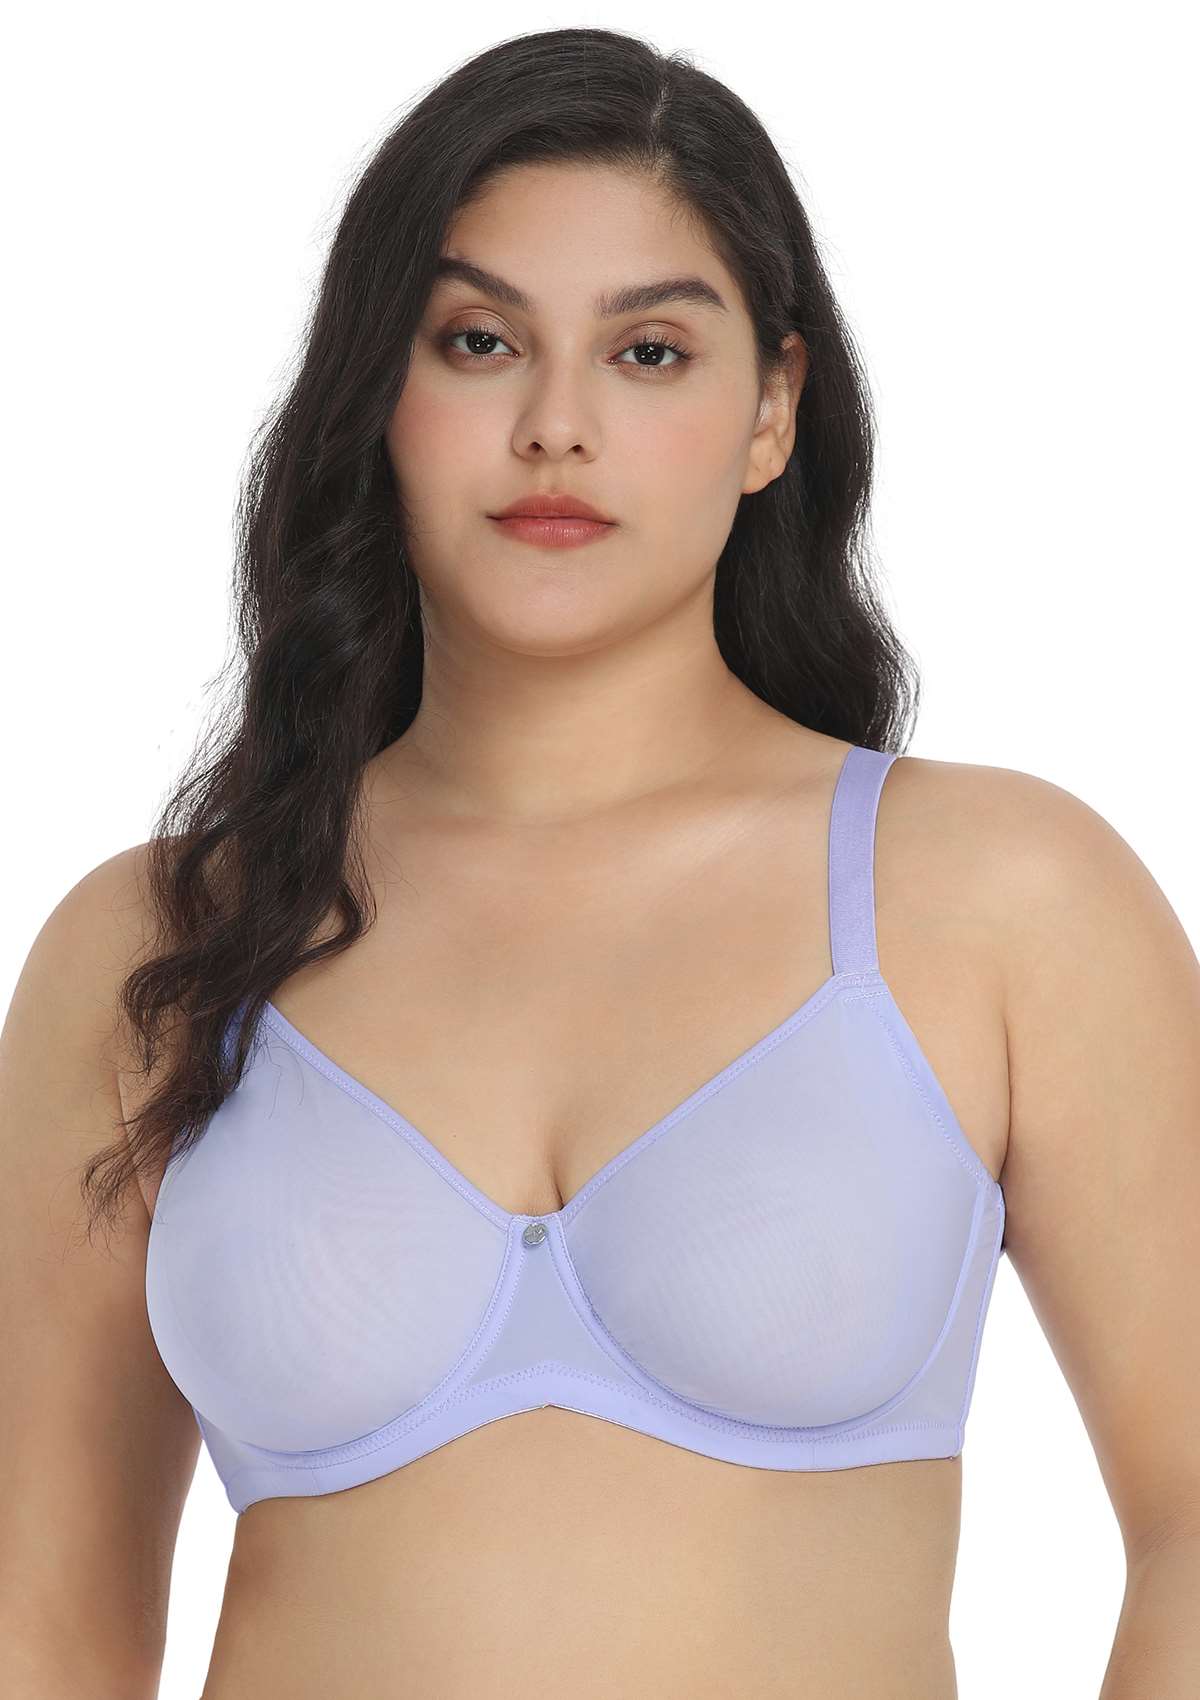 HSIA Marquita Ultimate Comfort Unlined Mesh Sheer Airy Underwire Bra - 38 / D / Black